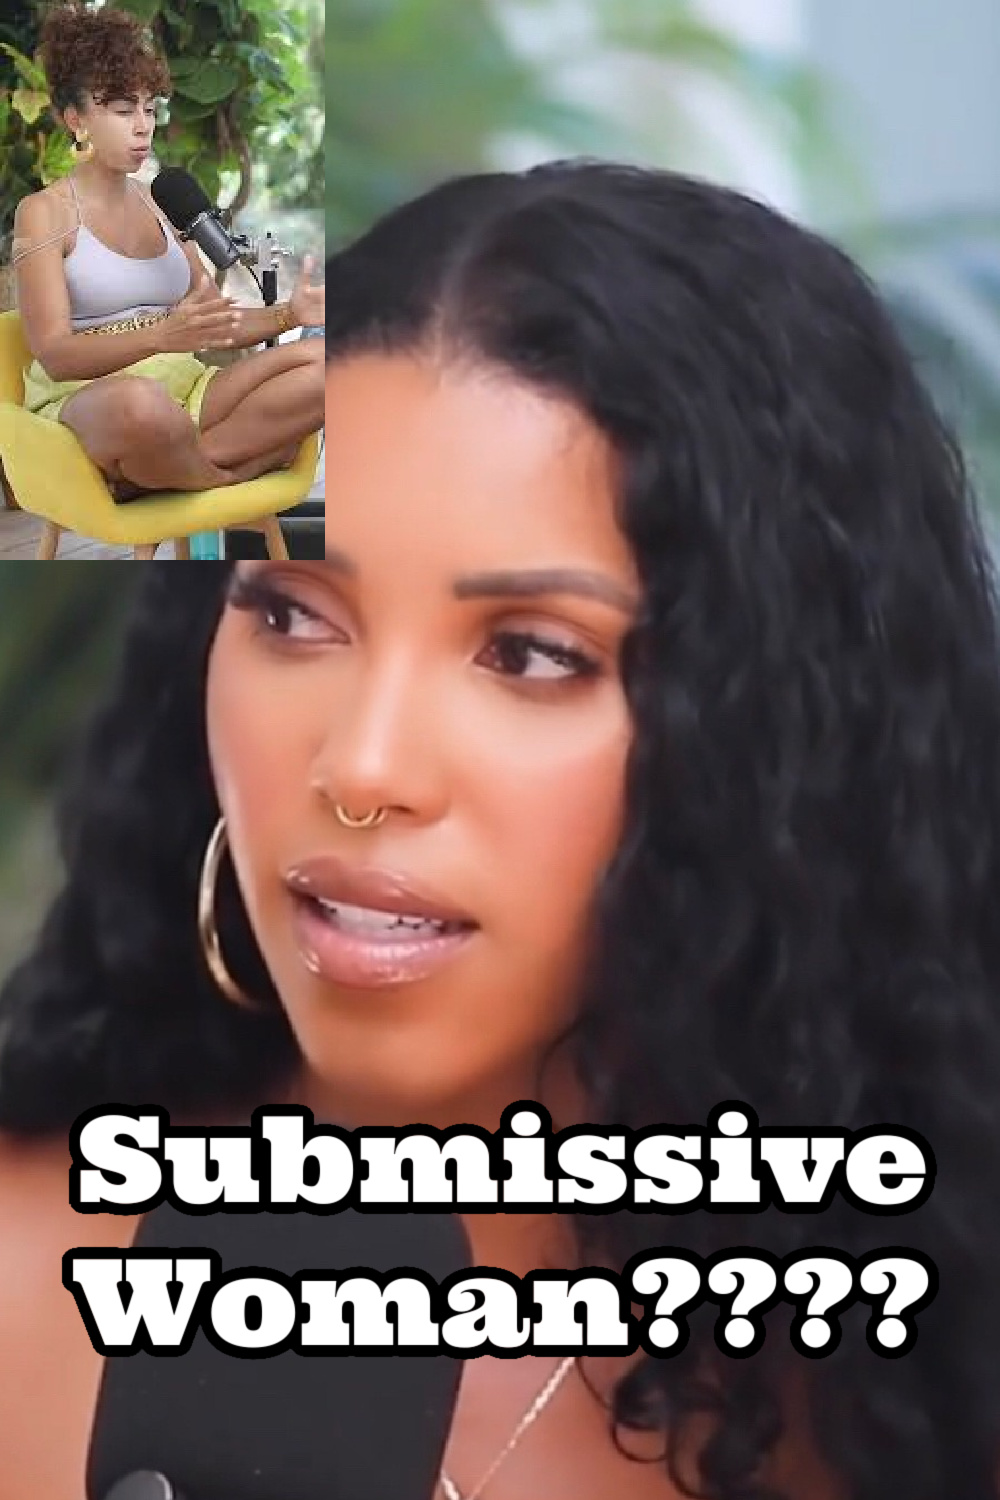 should you submit to a man, submissive woman, should women submit, should women be submissive, what is a submissive woman, submission in a relationship, should you submit to your husband, shan boody jazzy, shan boody jasmin brown, cam newton jasmin brown, cam newton girlfriend jasmine brown, viral submissive clip, sexual polarity masculine feminine, feminine and masculine energy in relationships, difference between feminine and masculine energy, understanding masculine and feminine energy, Everyday starlet, sarah blodgett,